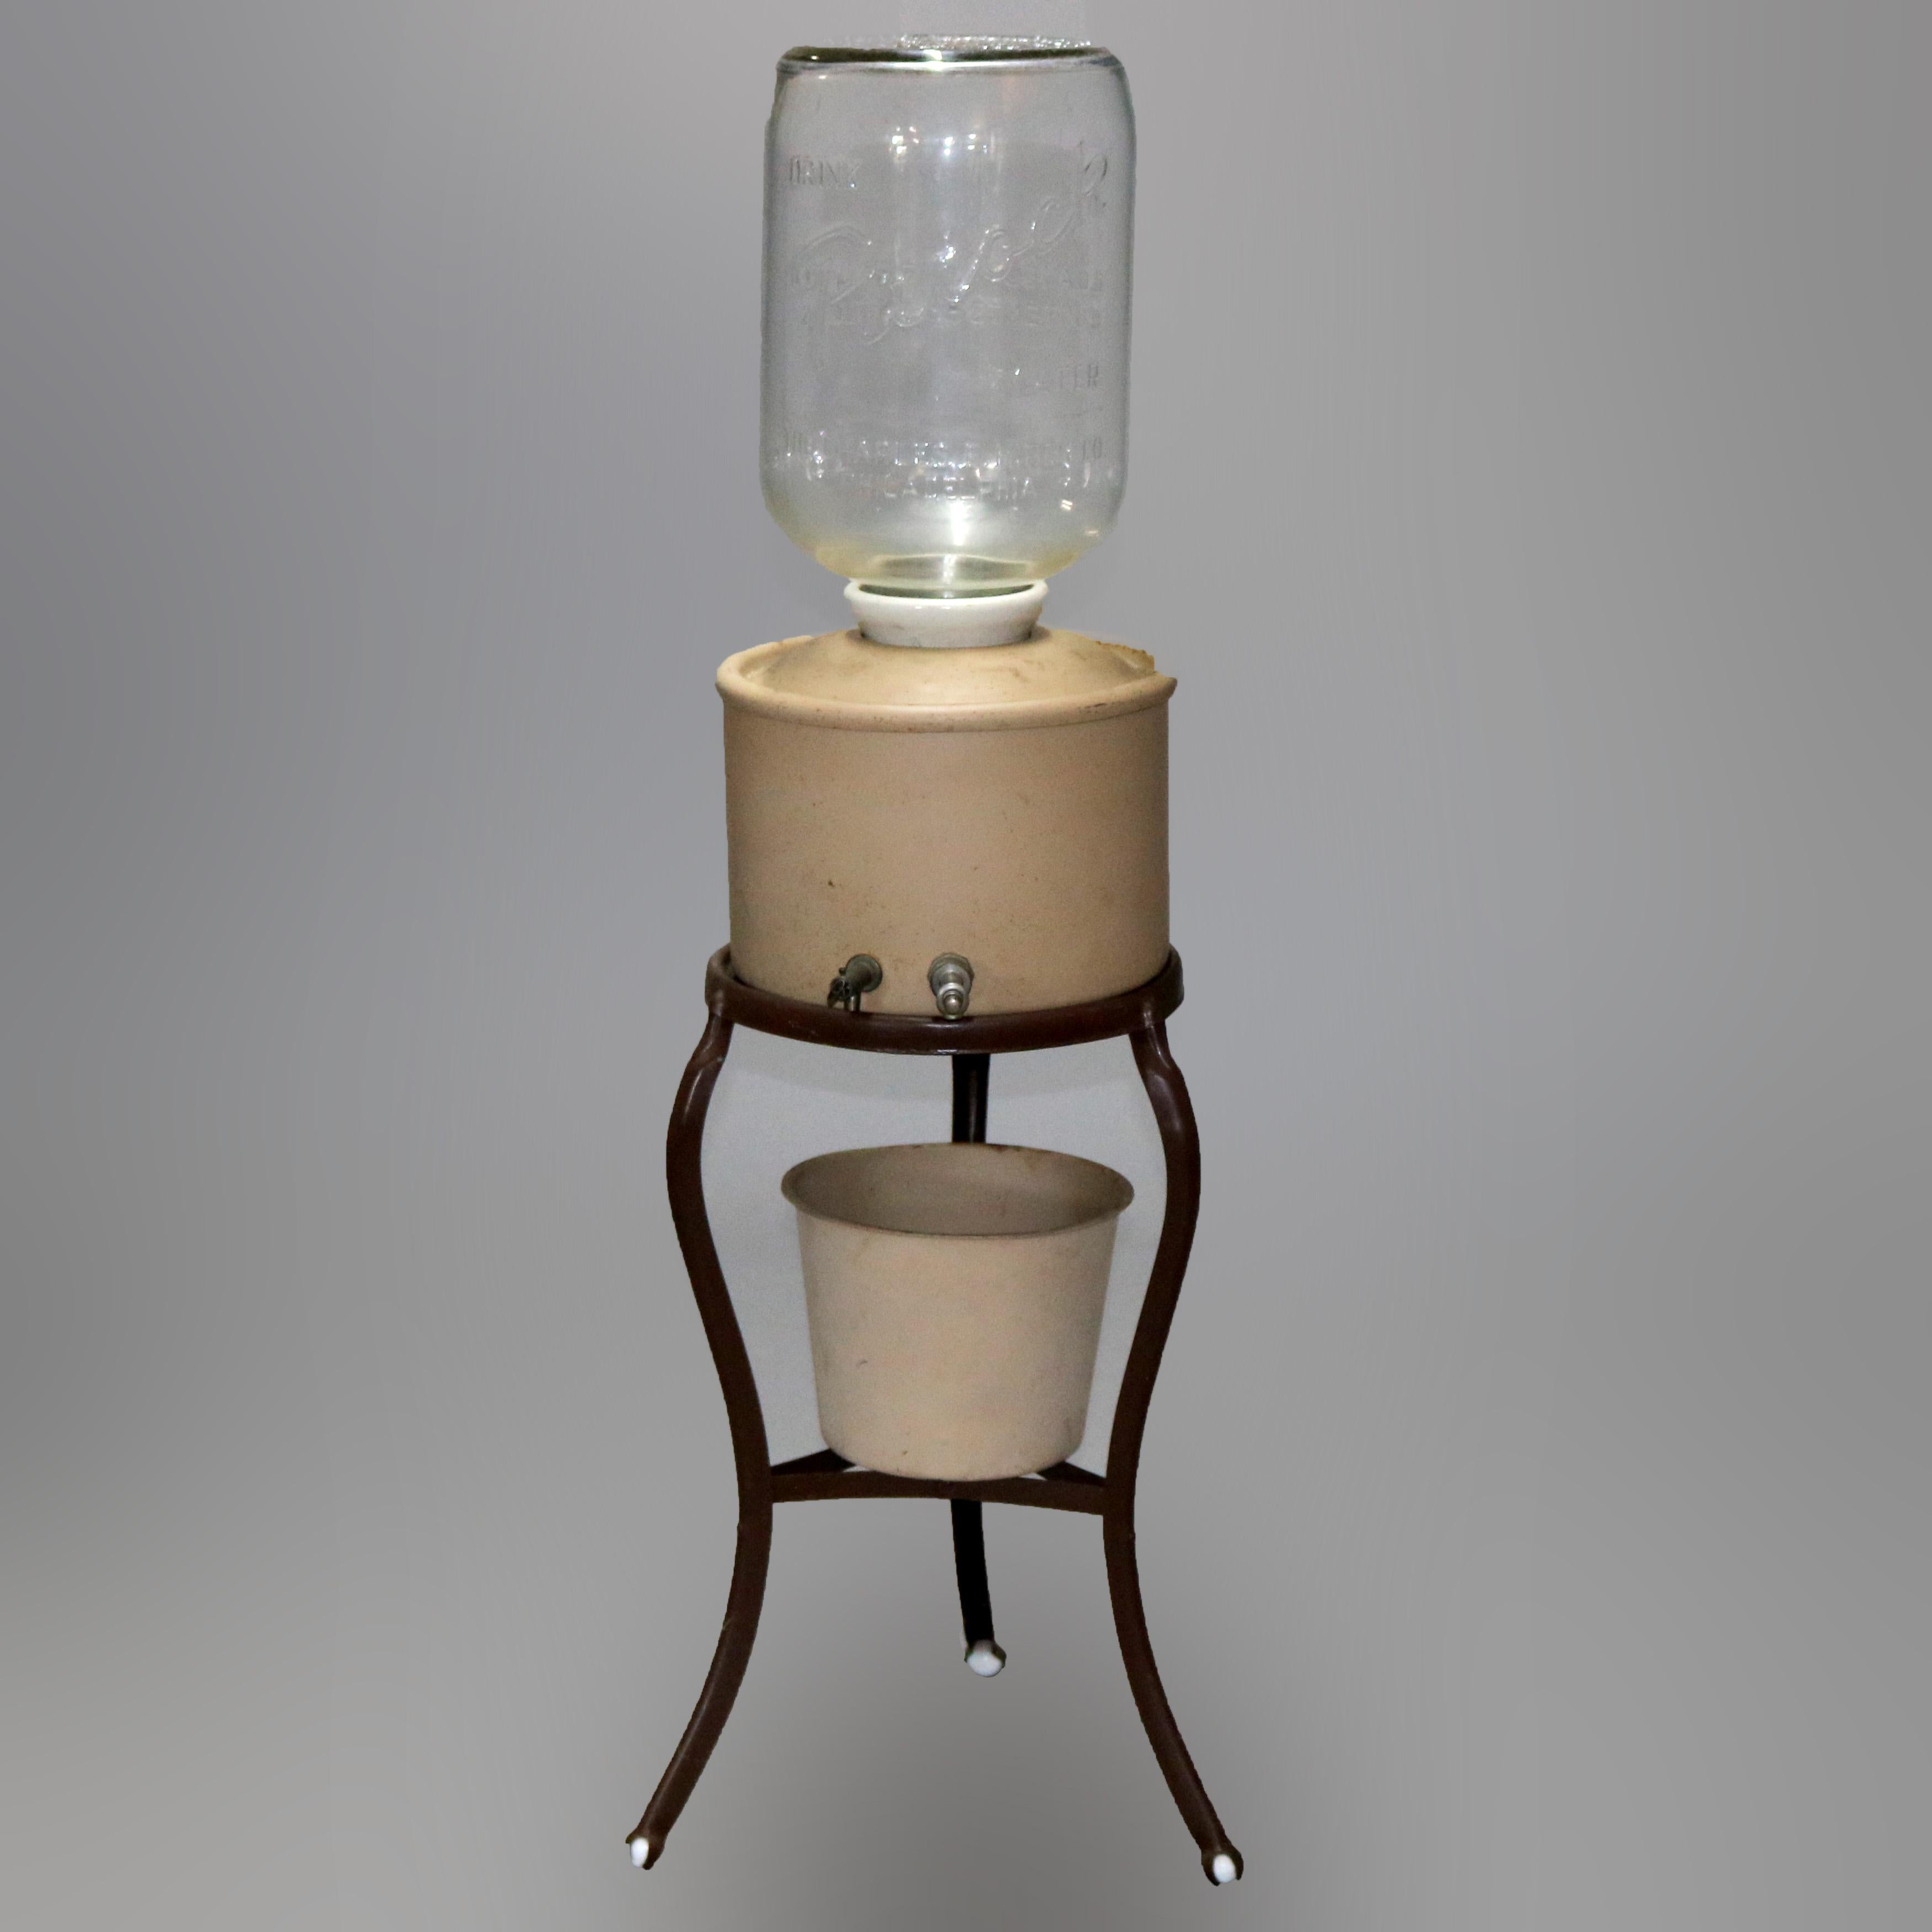 An antique Purock water cooler offers metal dispensing unit on iron base with lower vessel and glass jug having embossed Purock, c1930.

Measures: 19.38